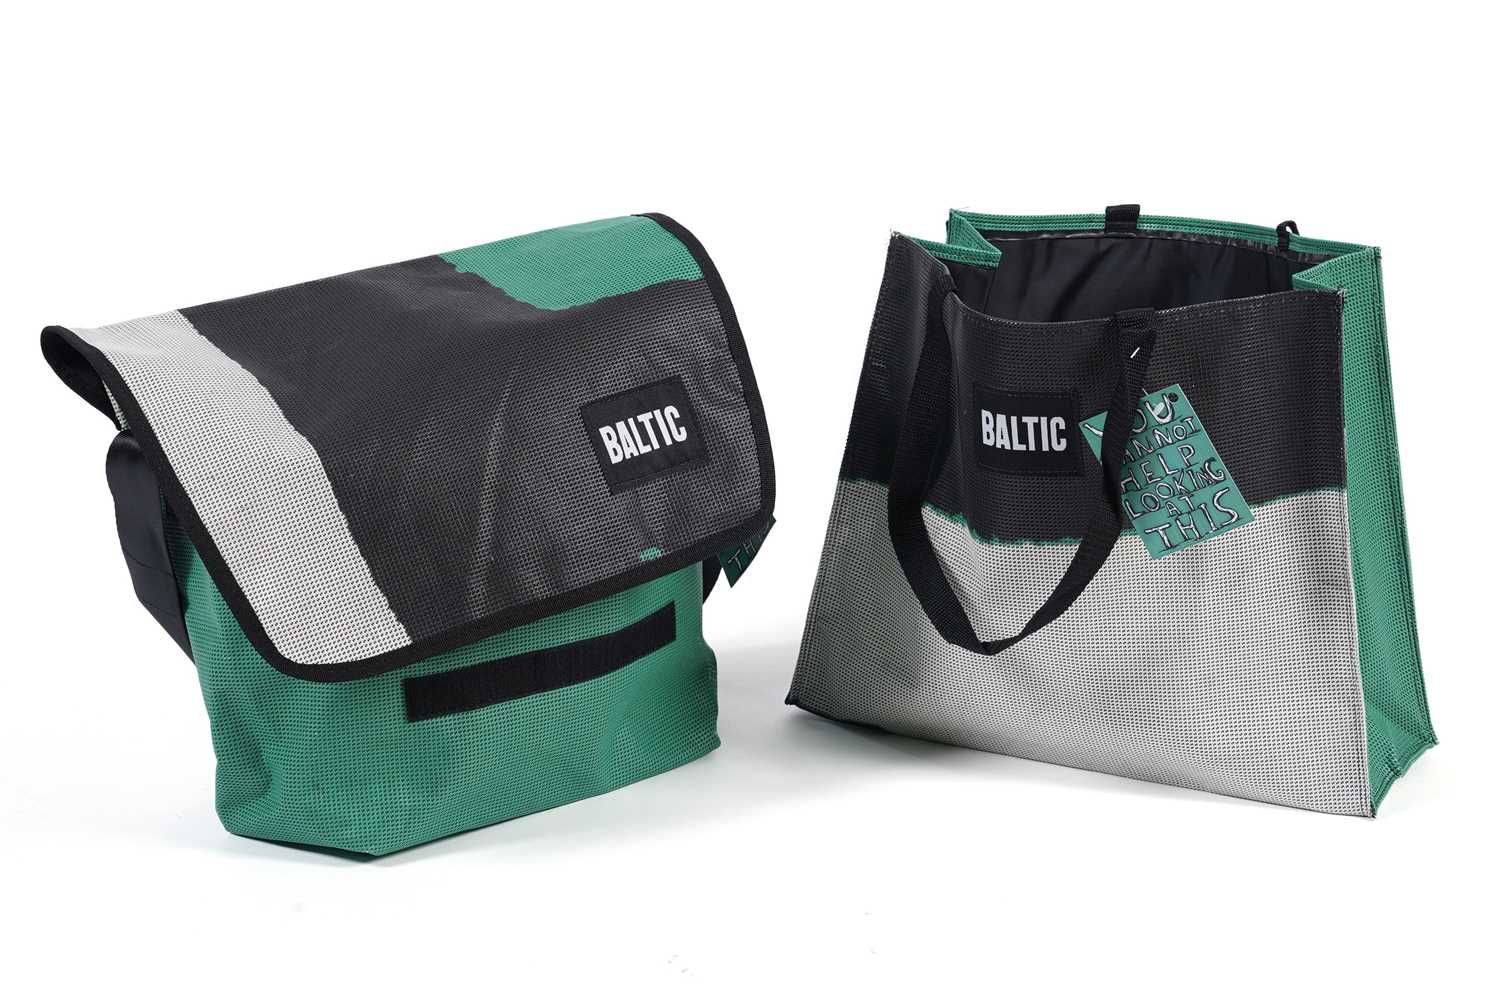 After David Shrigley - YOU CANNOT HELP LOOKING AT THIS | two limited edition BALTIC bags